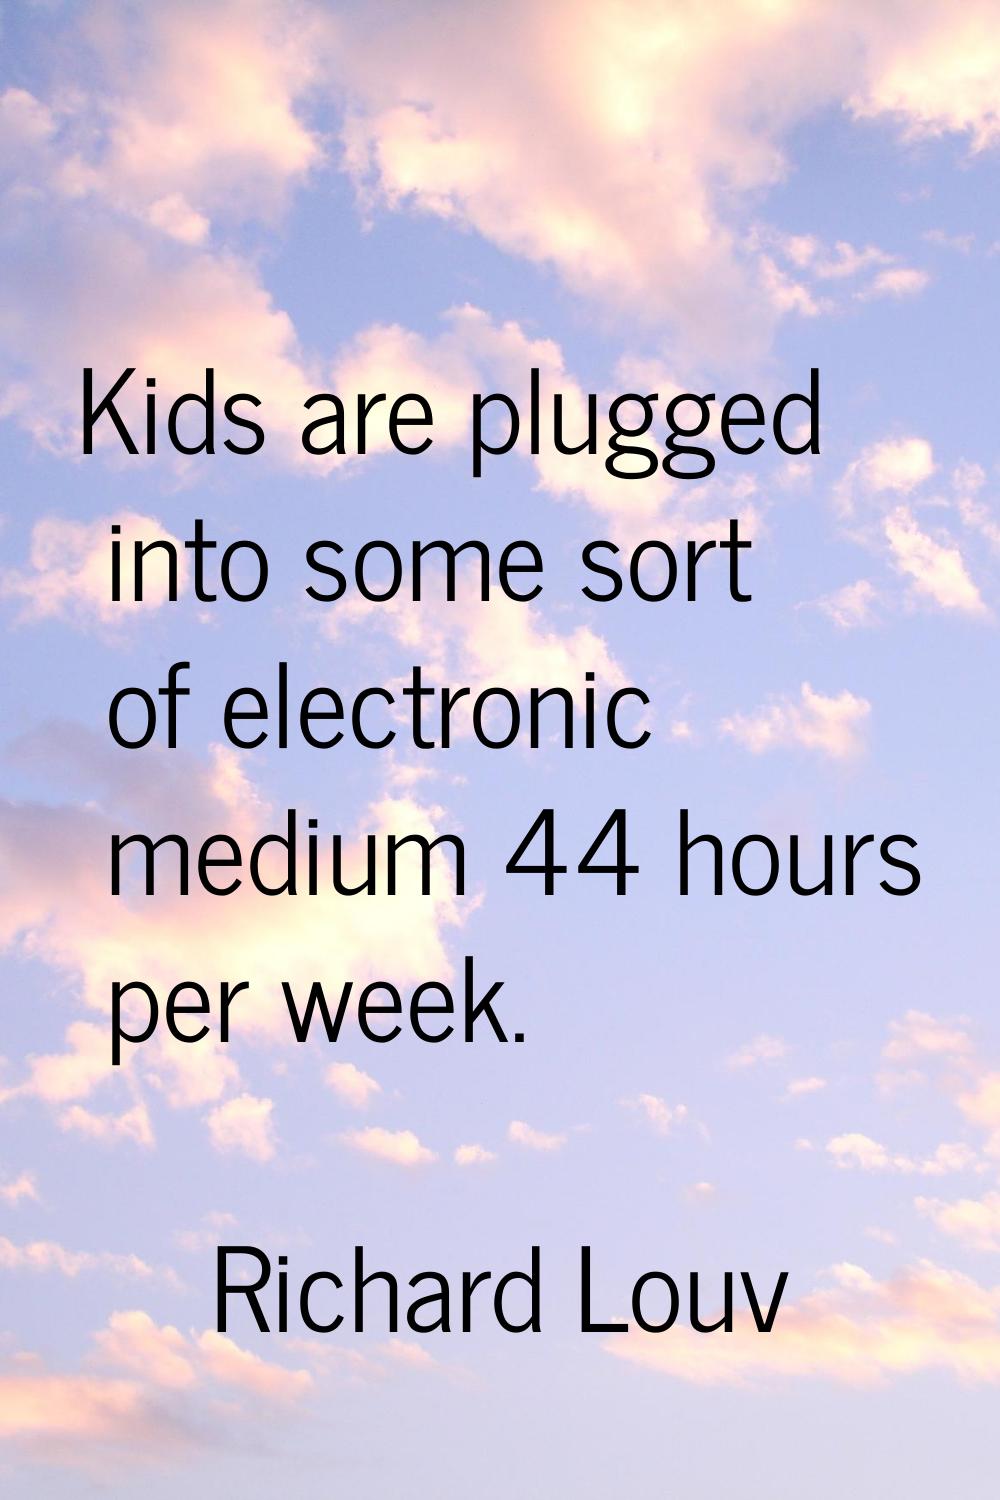 Kids are plugged into some sort of electronic medium 44 hours per week.